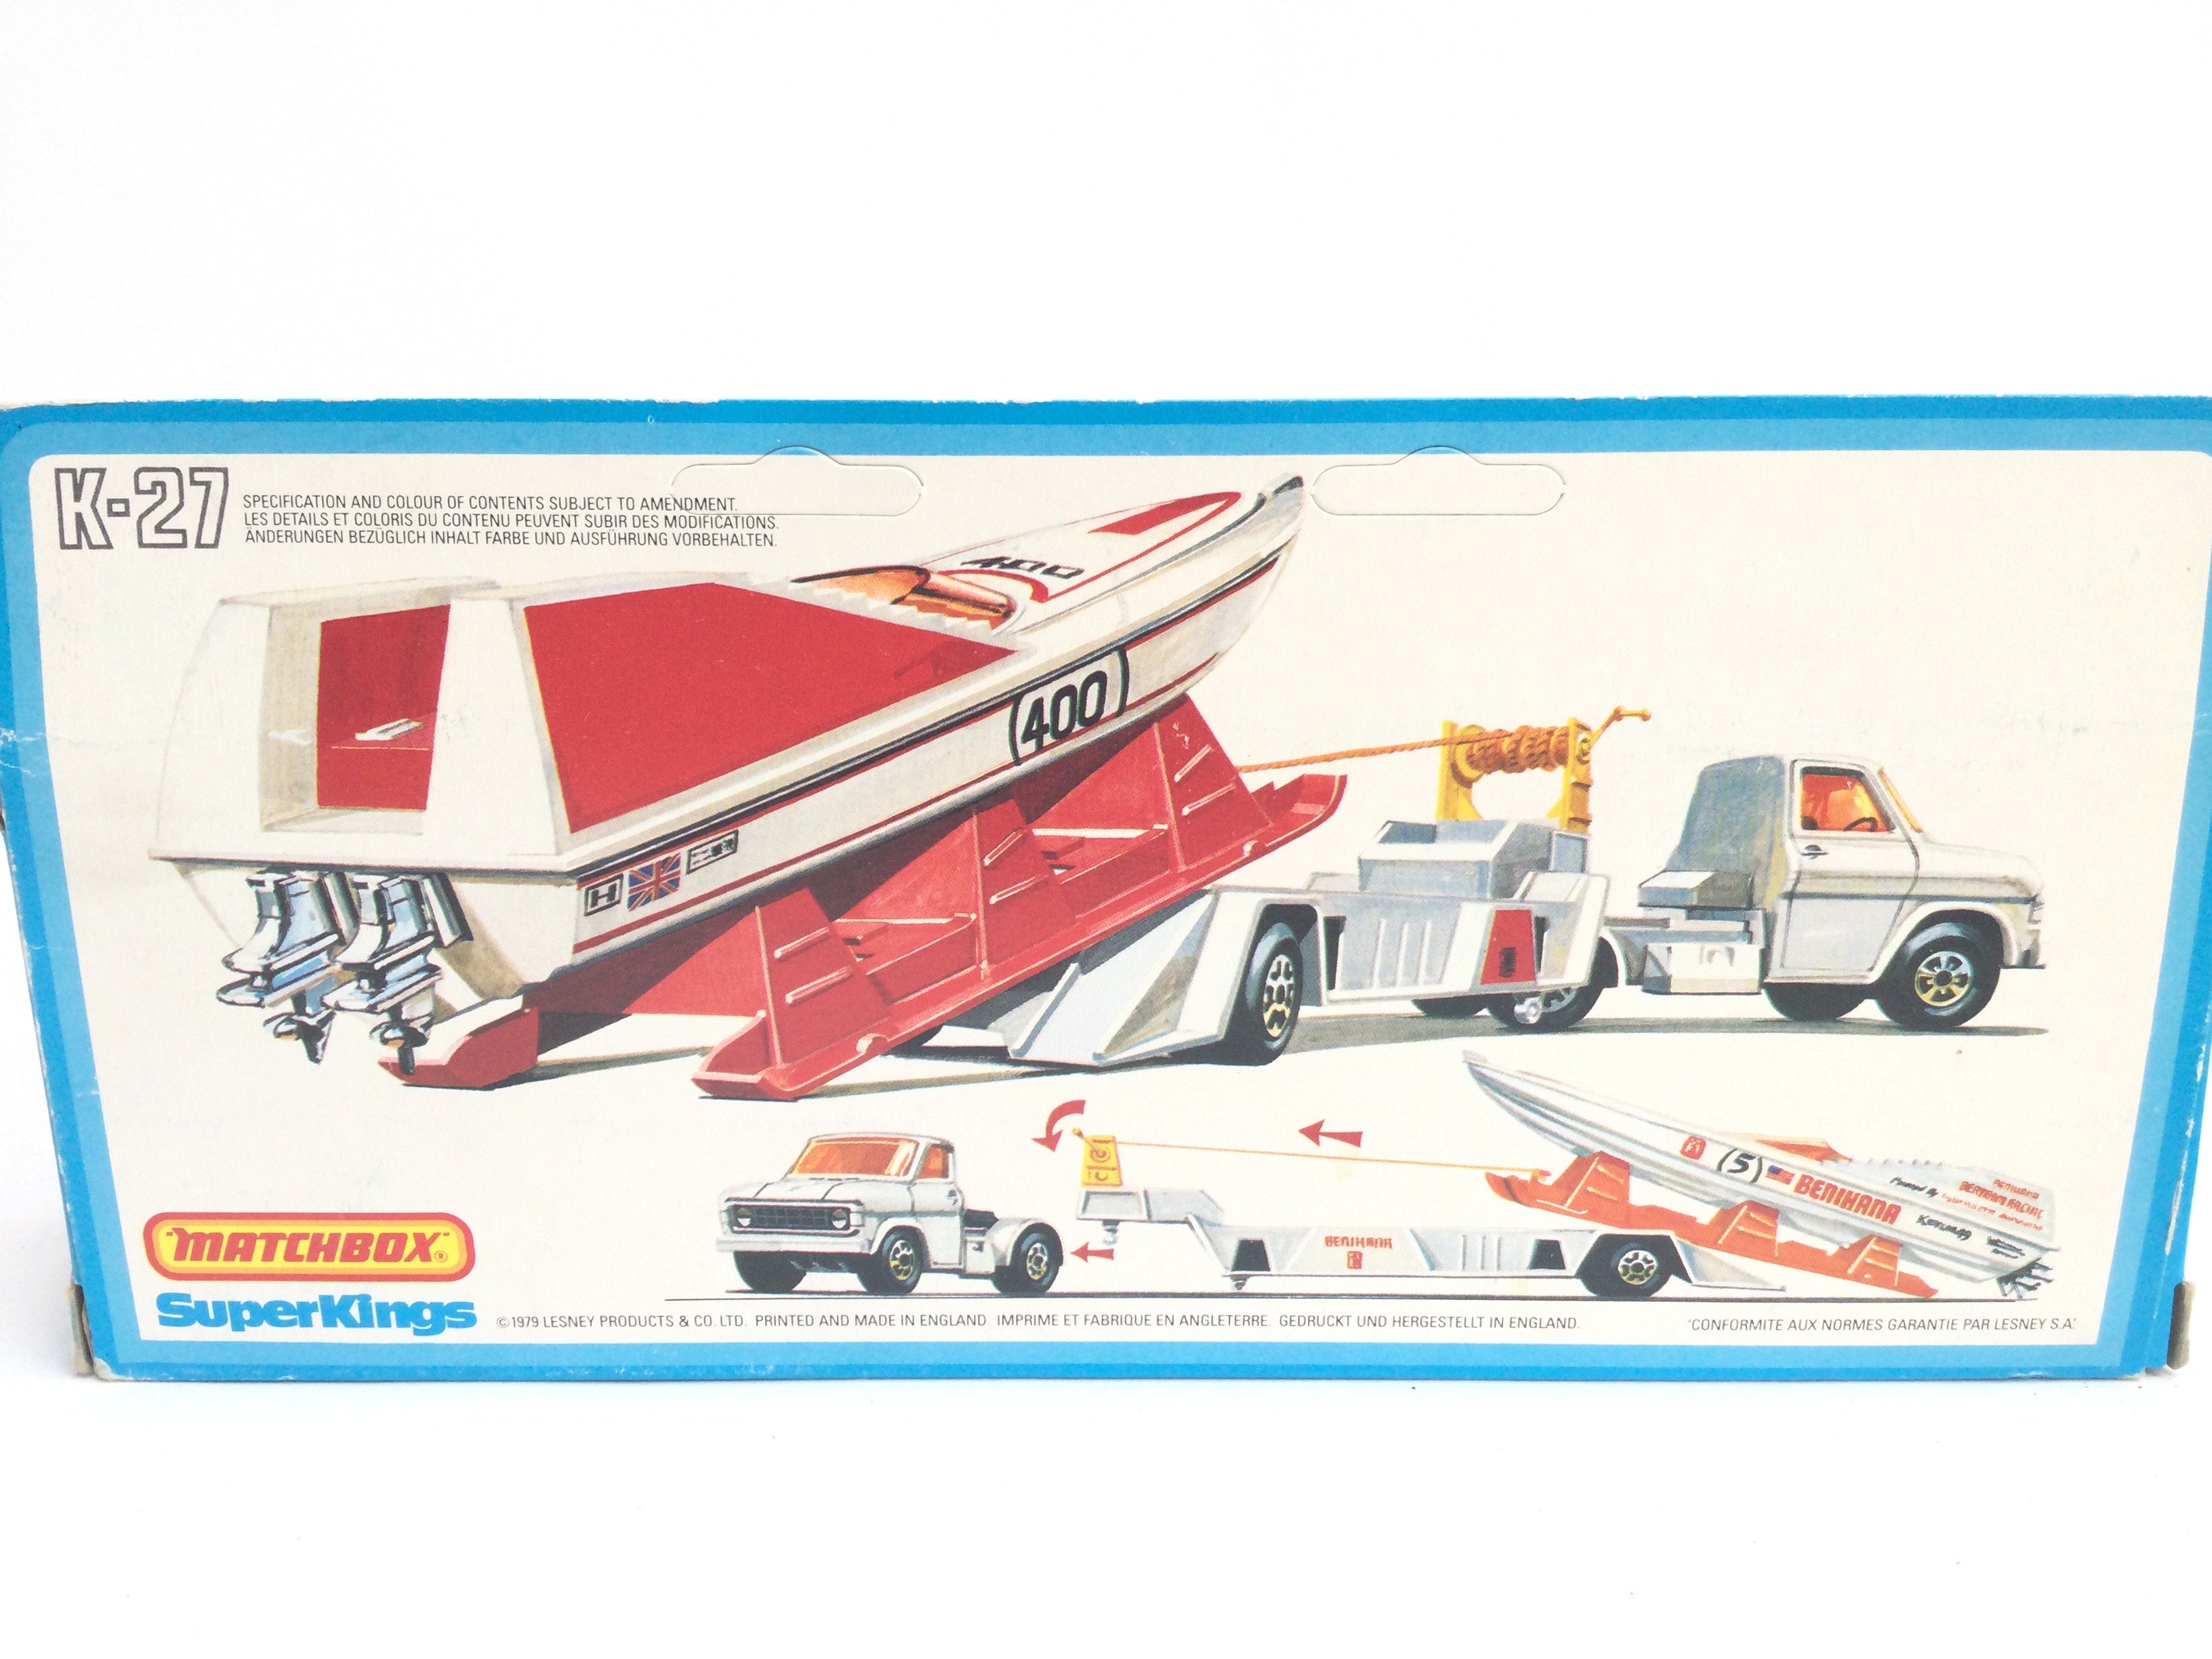 A Boxed Matchbox Power Boat and Transporter. # K-2 - Image 2 of 2